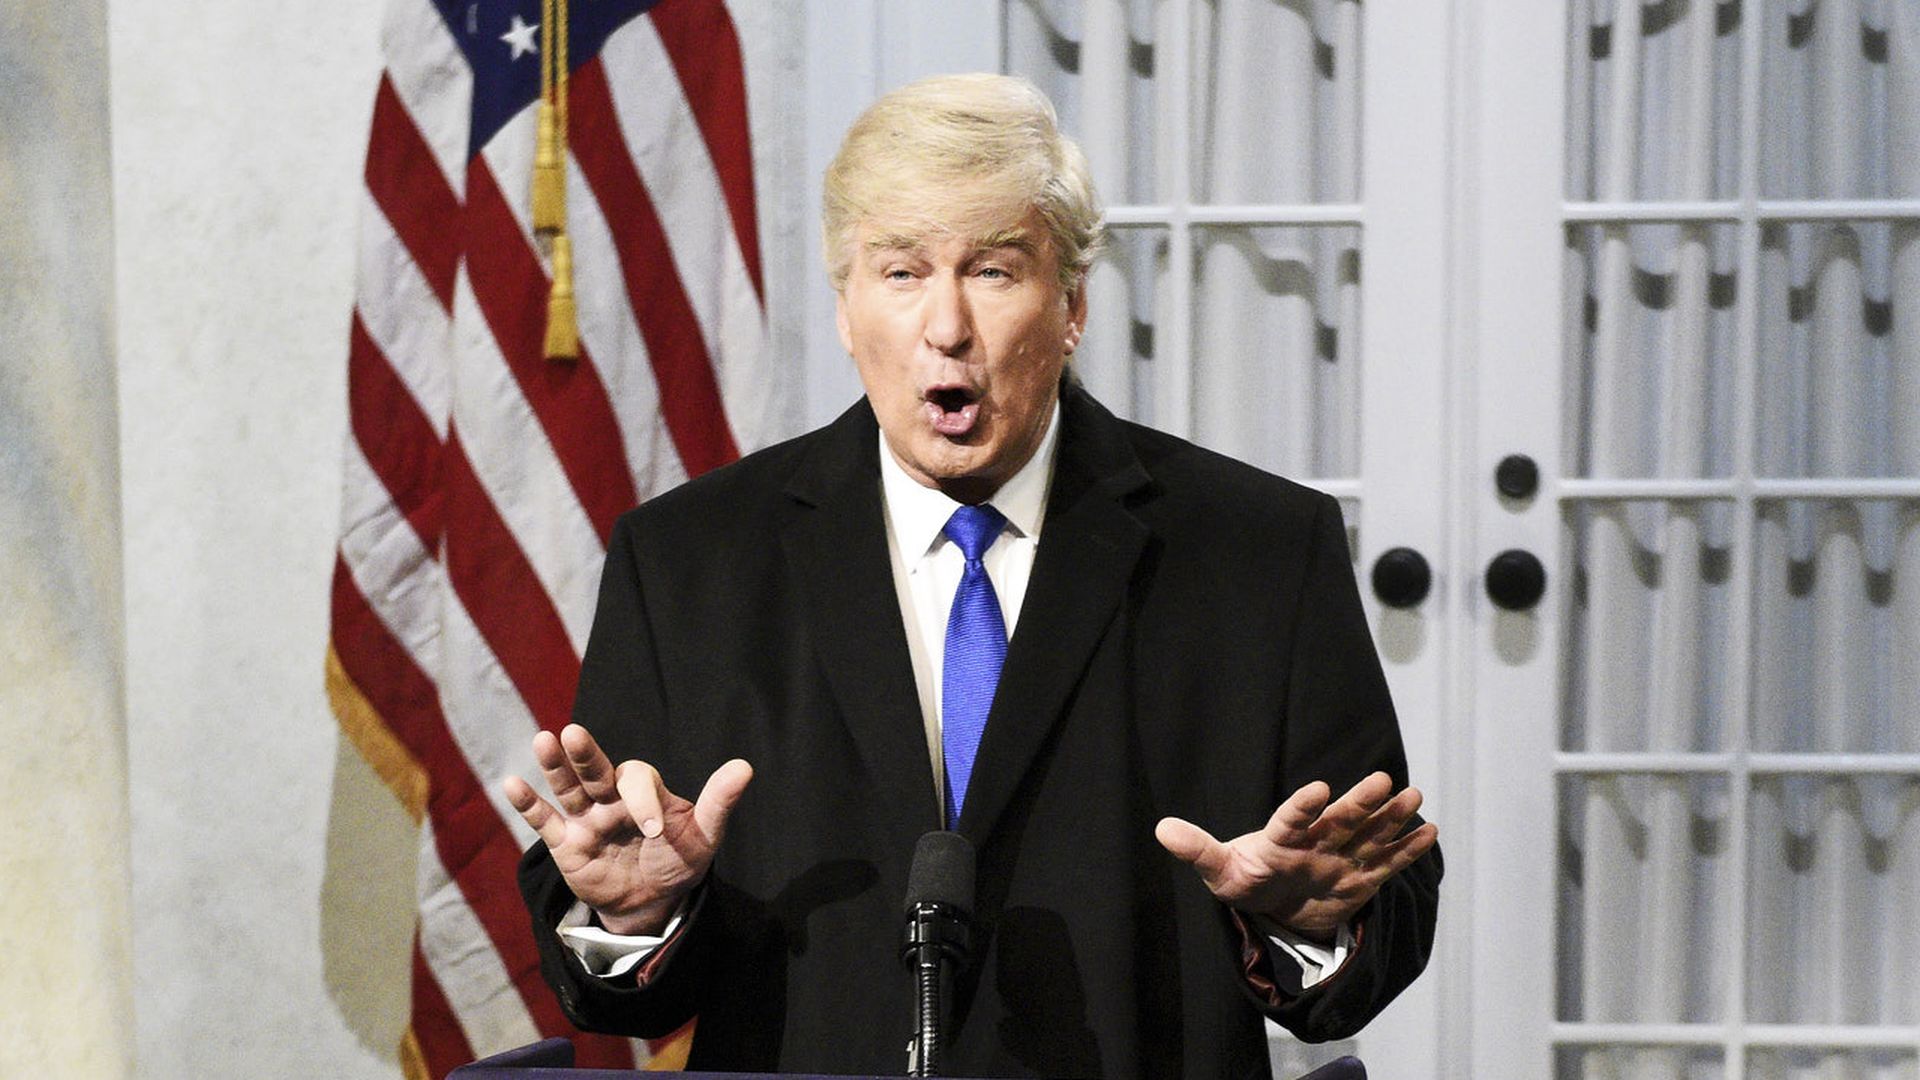  Alec Baldwin as Donald Trump during the "Trump Press Conference" Cold Open on Saturday, February 16